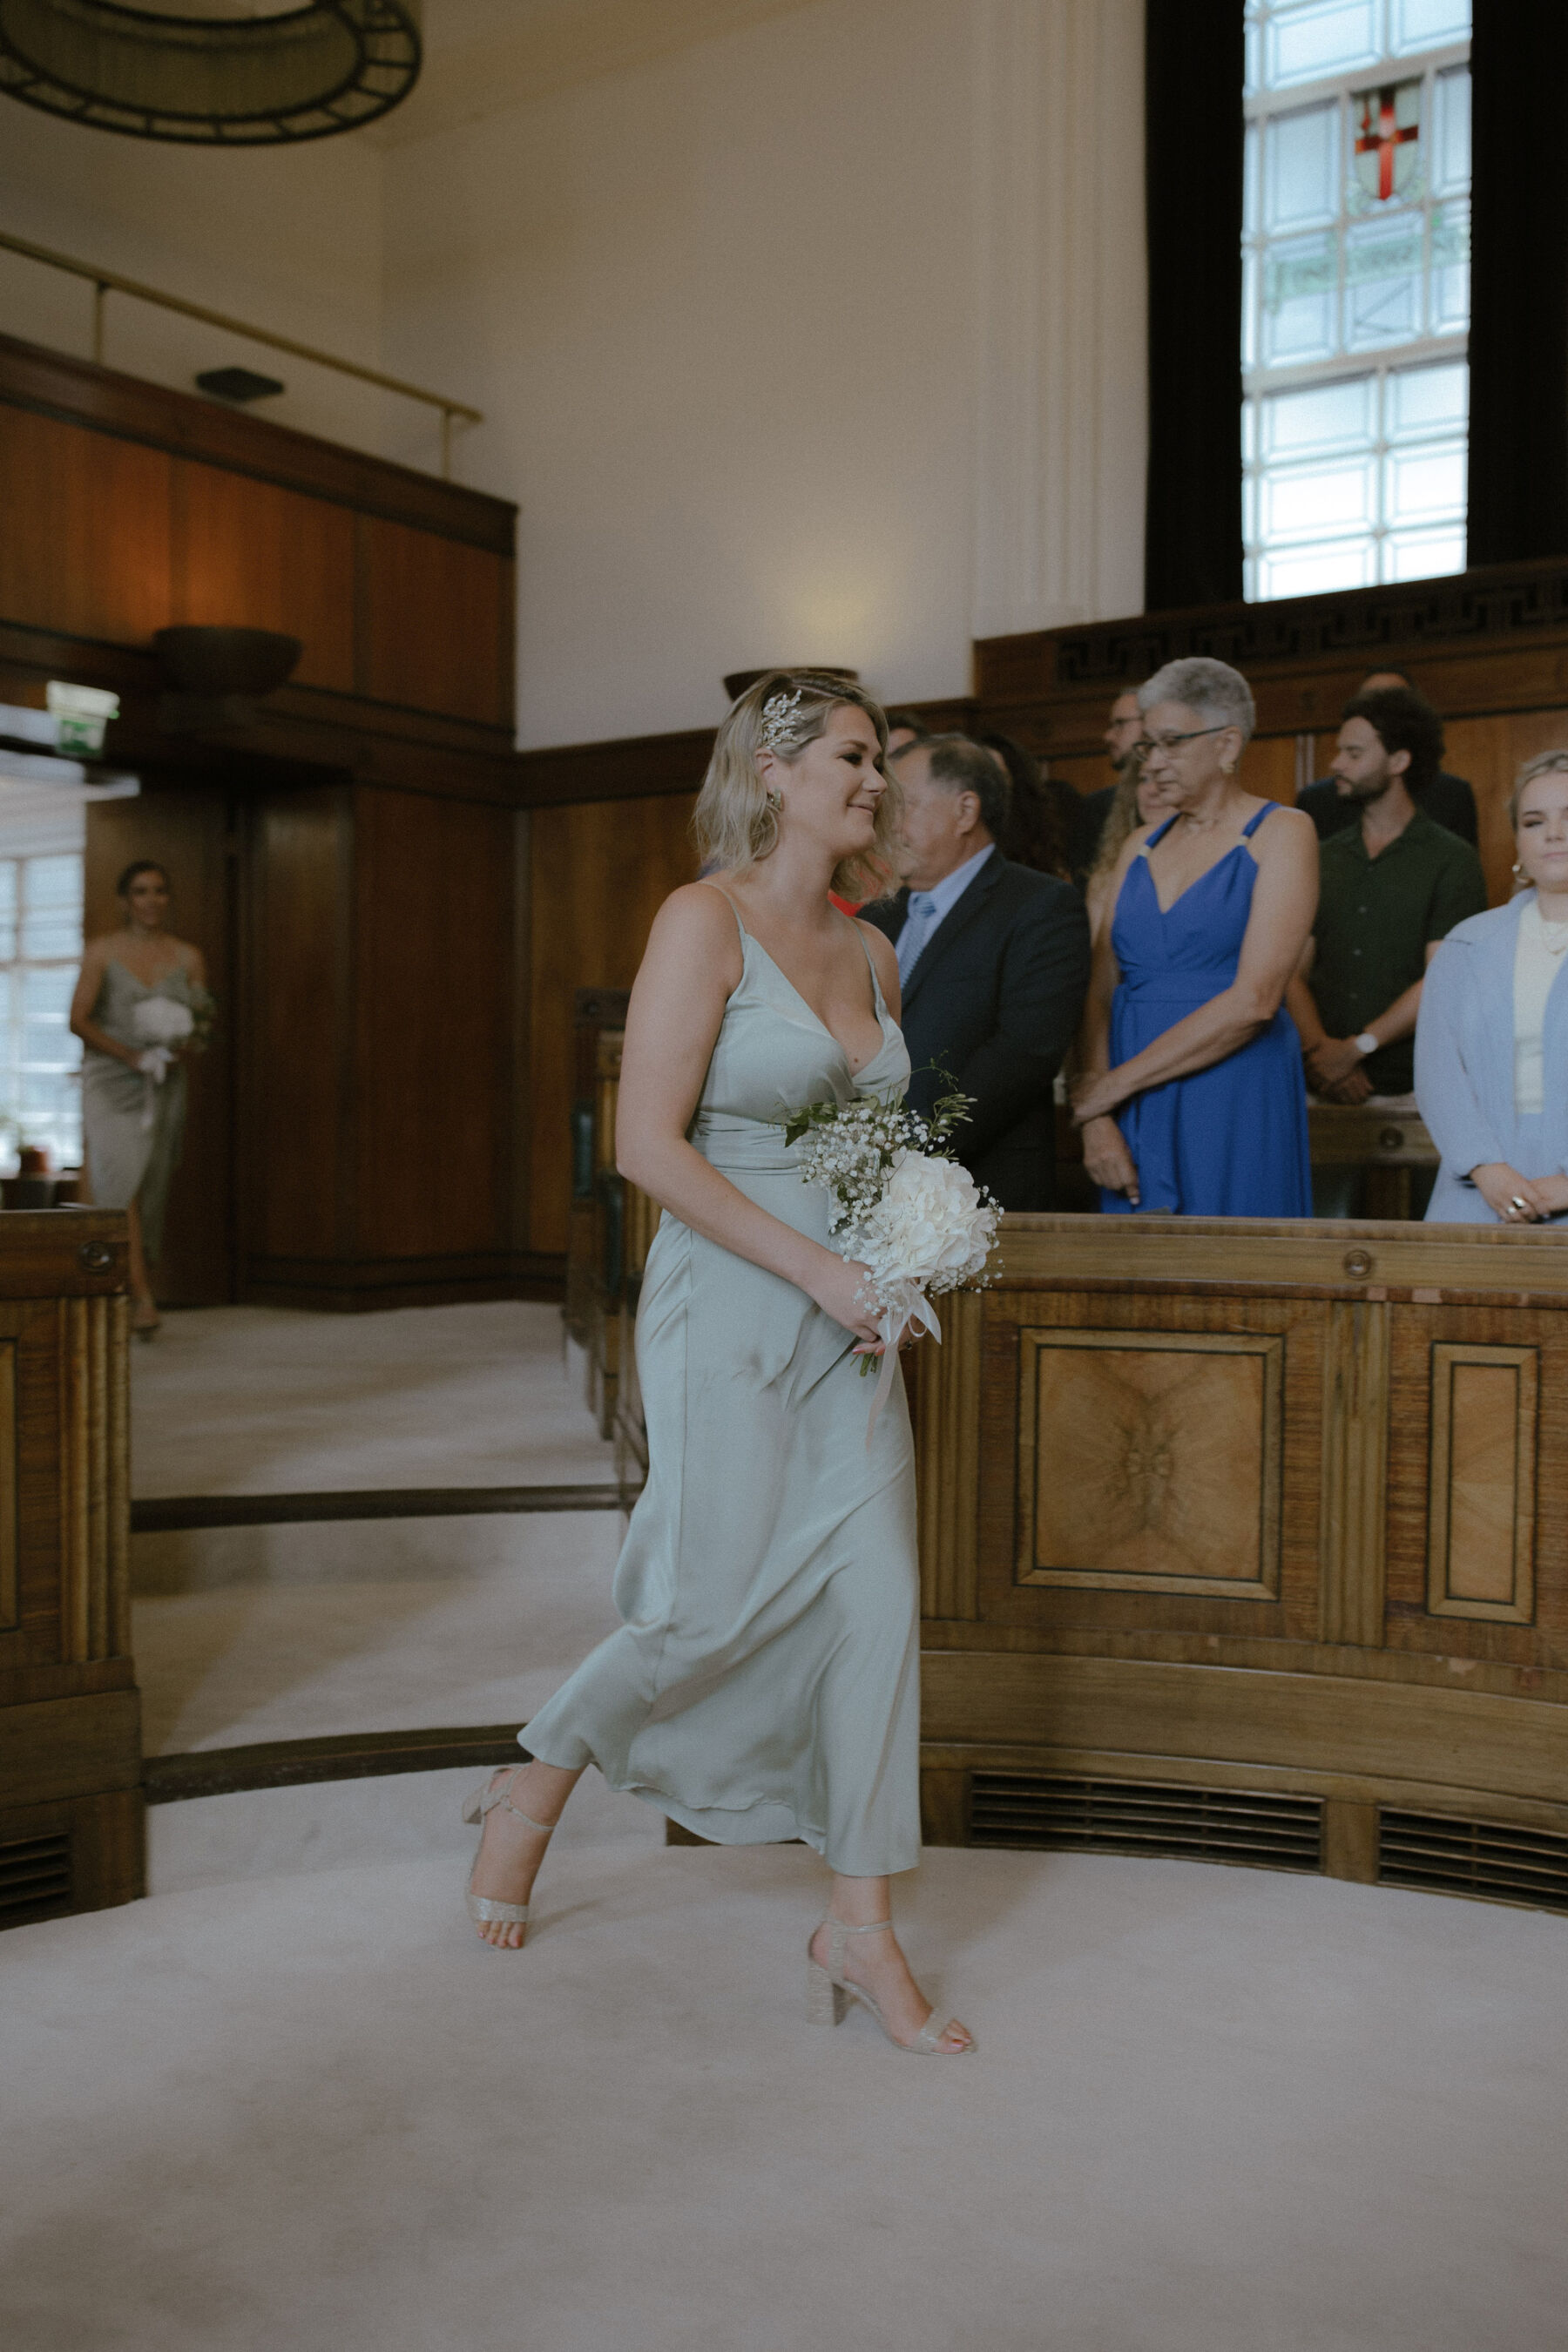 Bride walking into the ceremony wearing a long, sage green dress and carrying a small bouquet of gypsophila and white roses. Ruth Atkinson Photography.